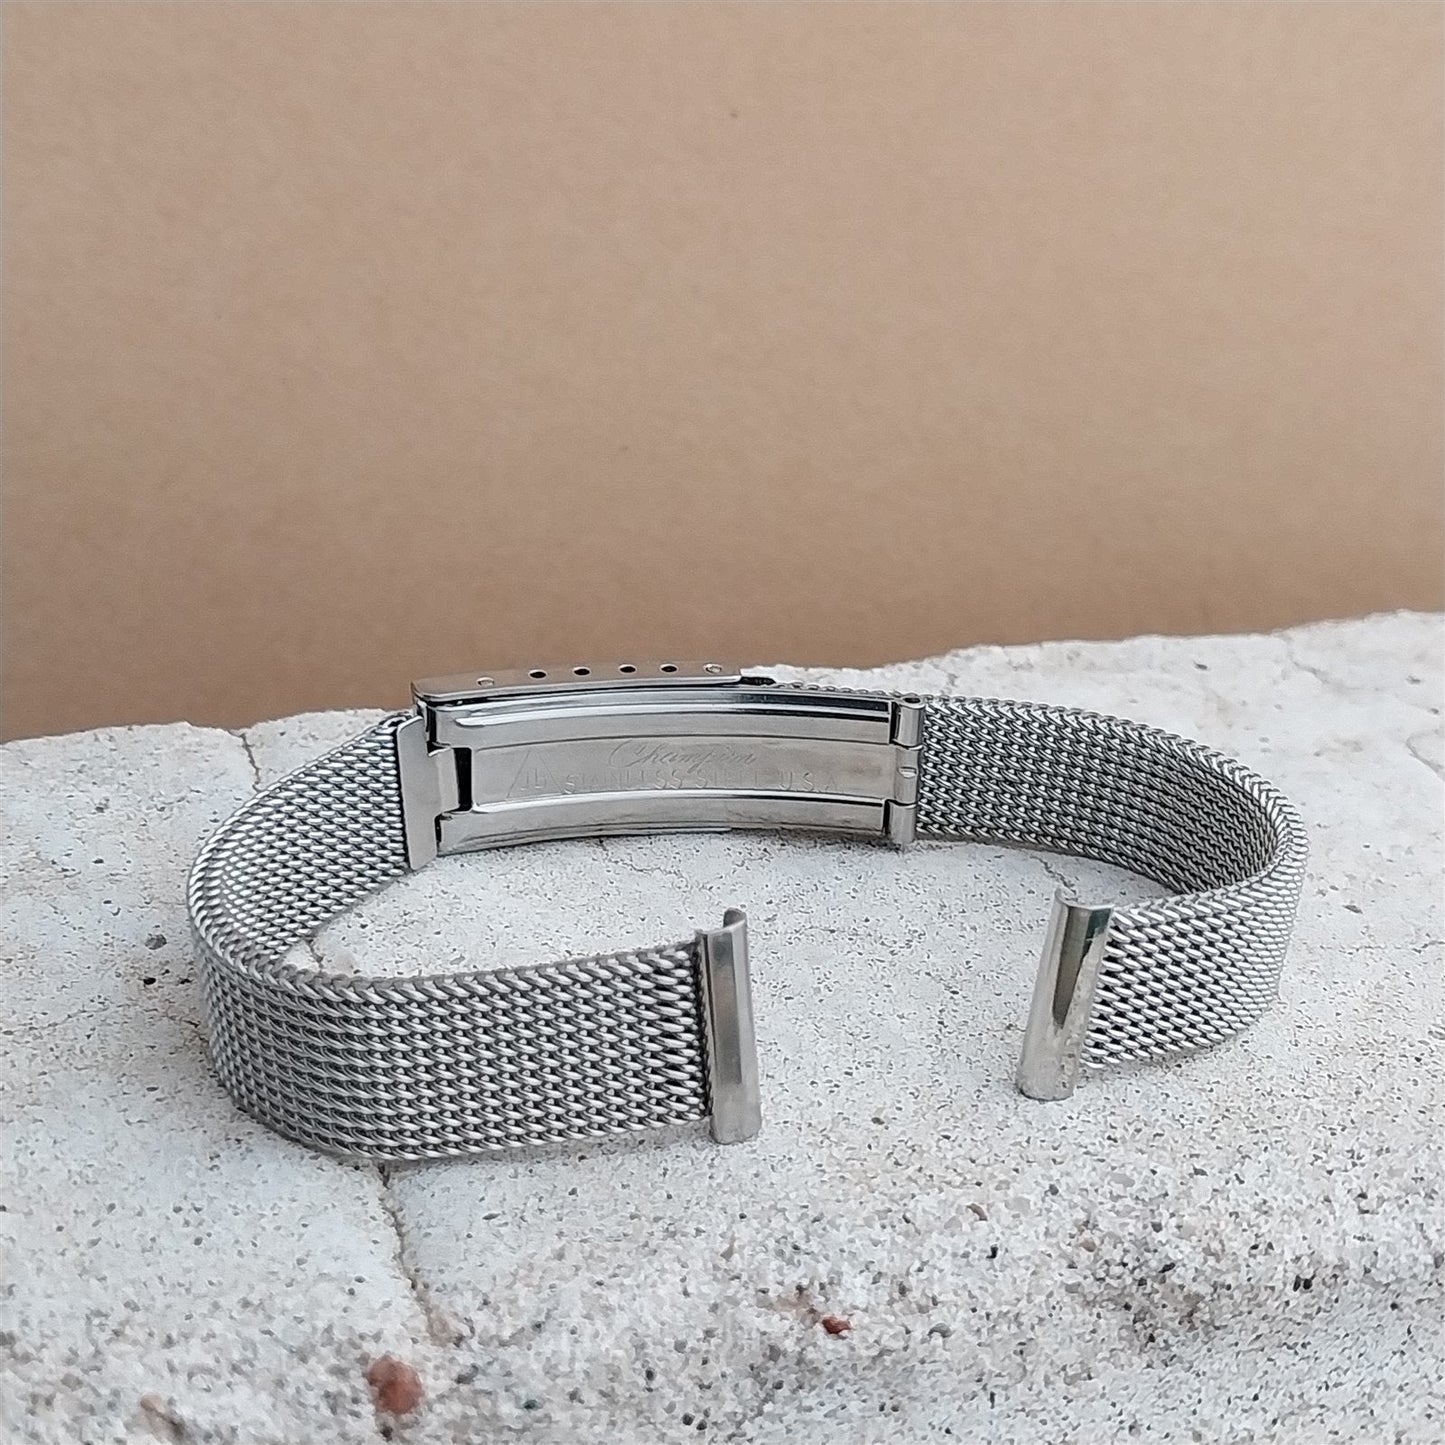 13mm JB Champion Womens Stainless Steel Mesh Unused nos 1960s Vintage Watch Band